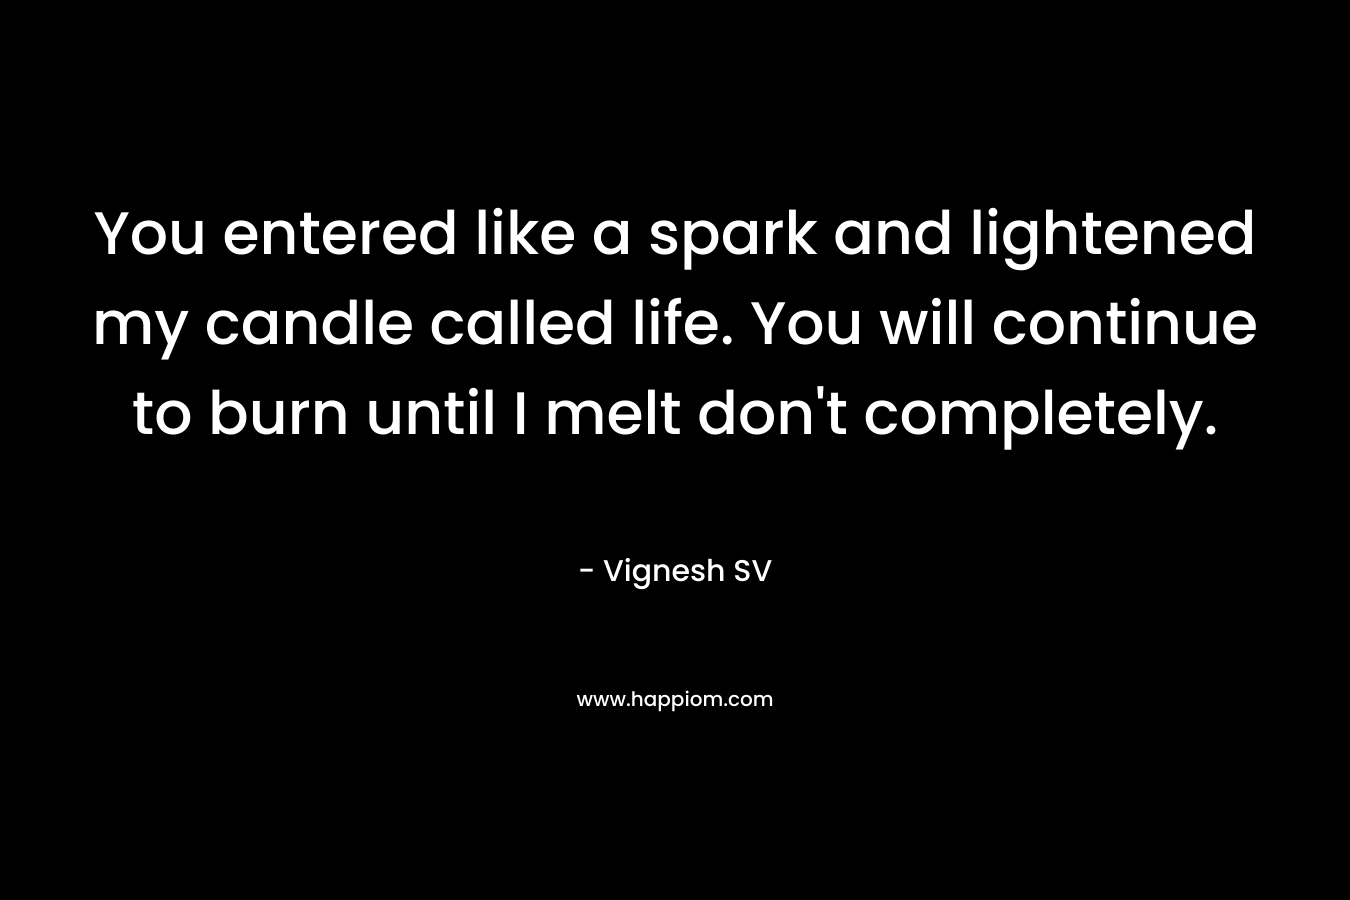 You entered like a spark and lightened my candle called life. You will continue to burn until I melt don’t completely. – Vignesh SV